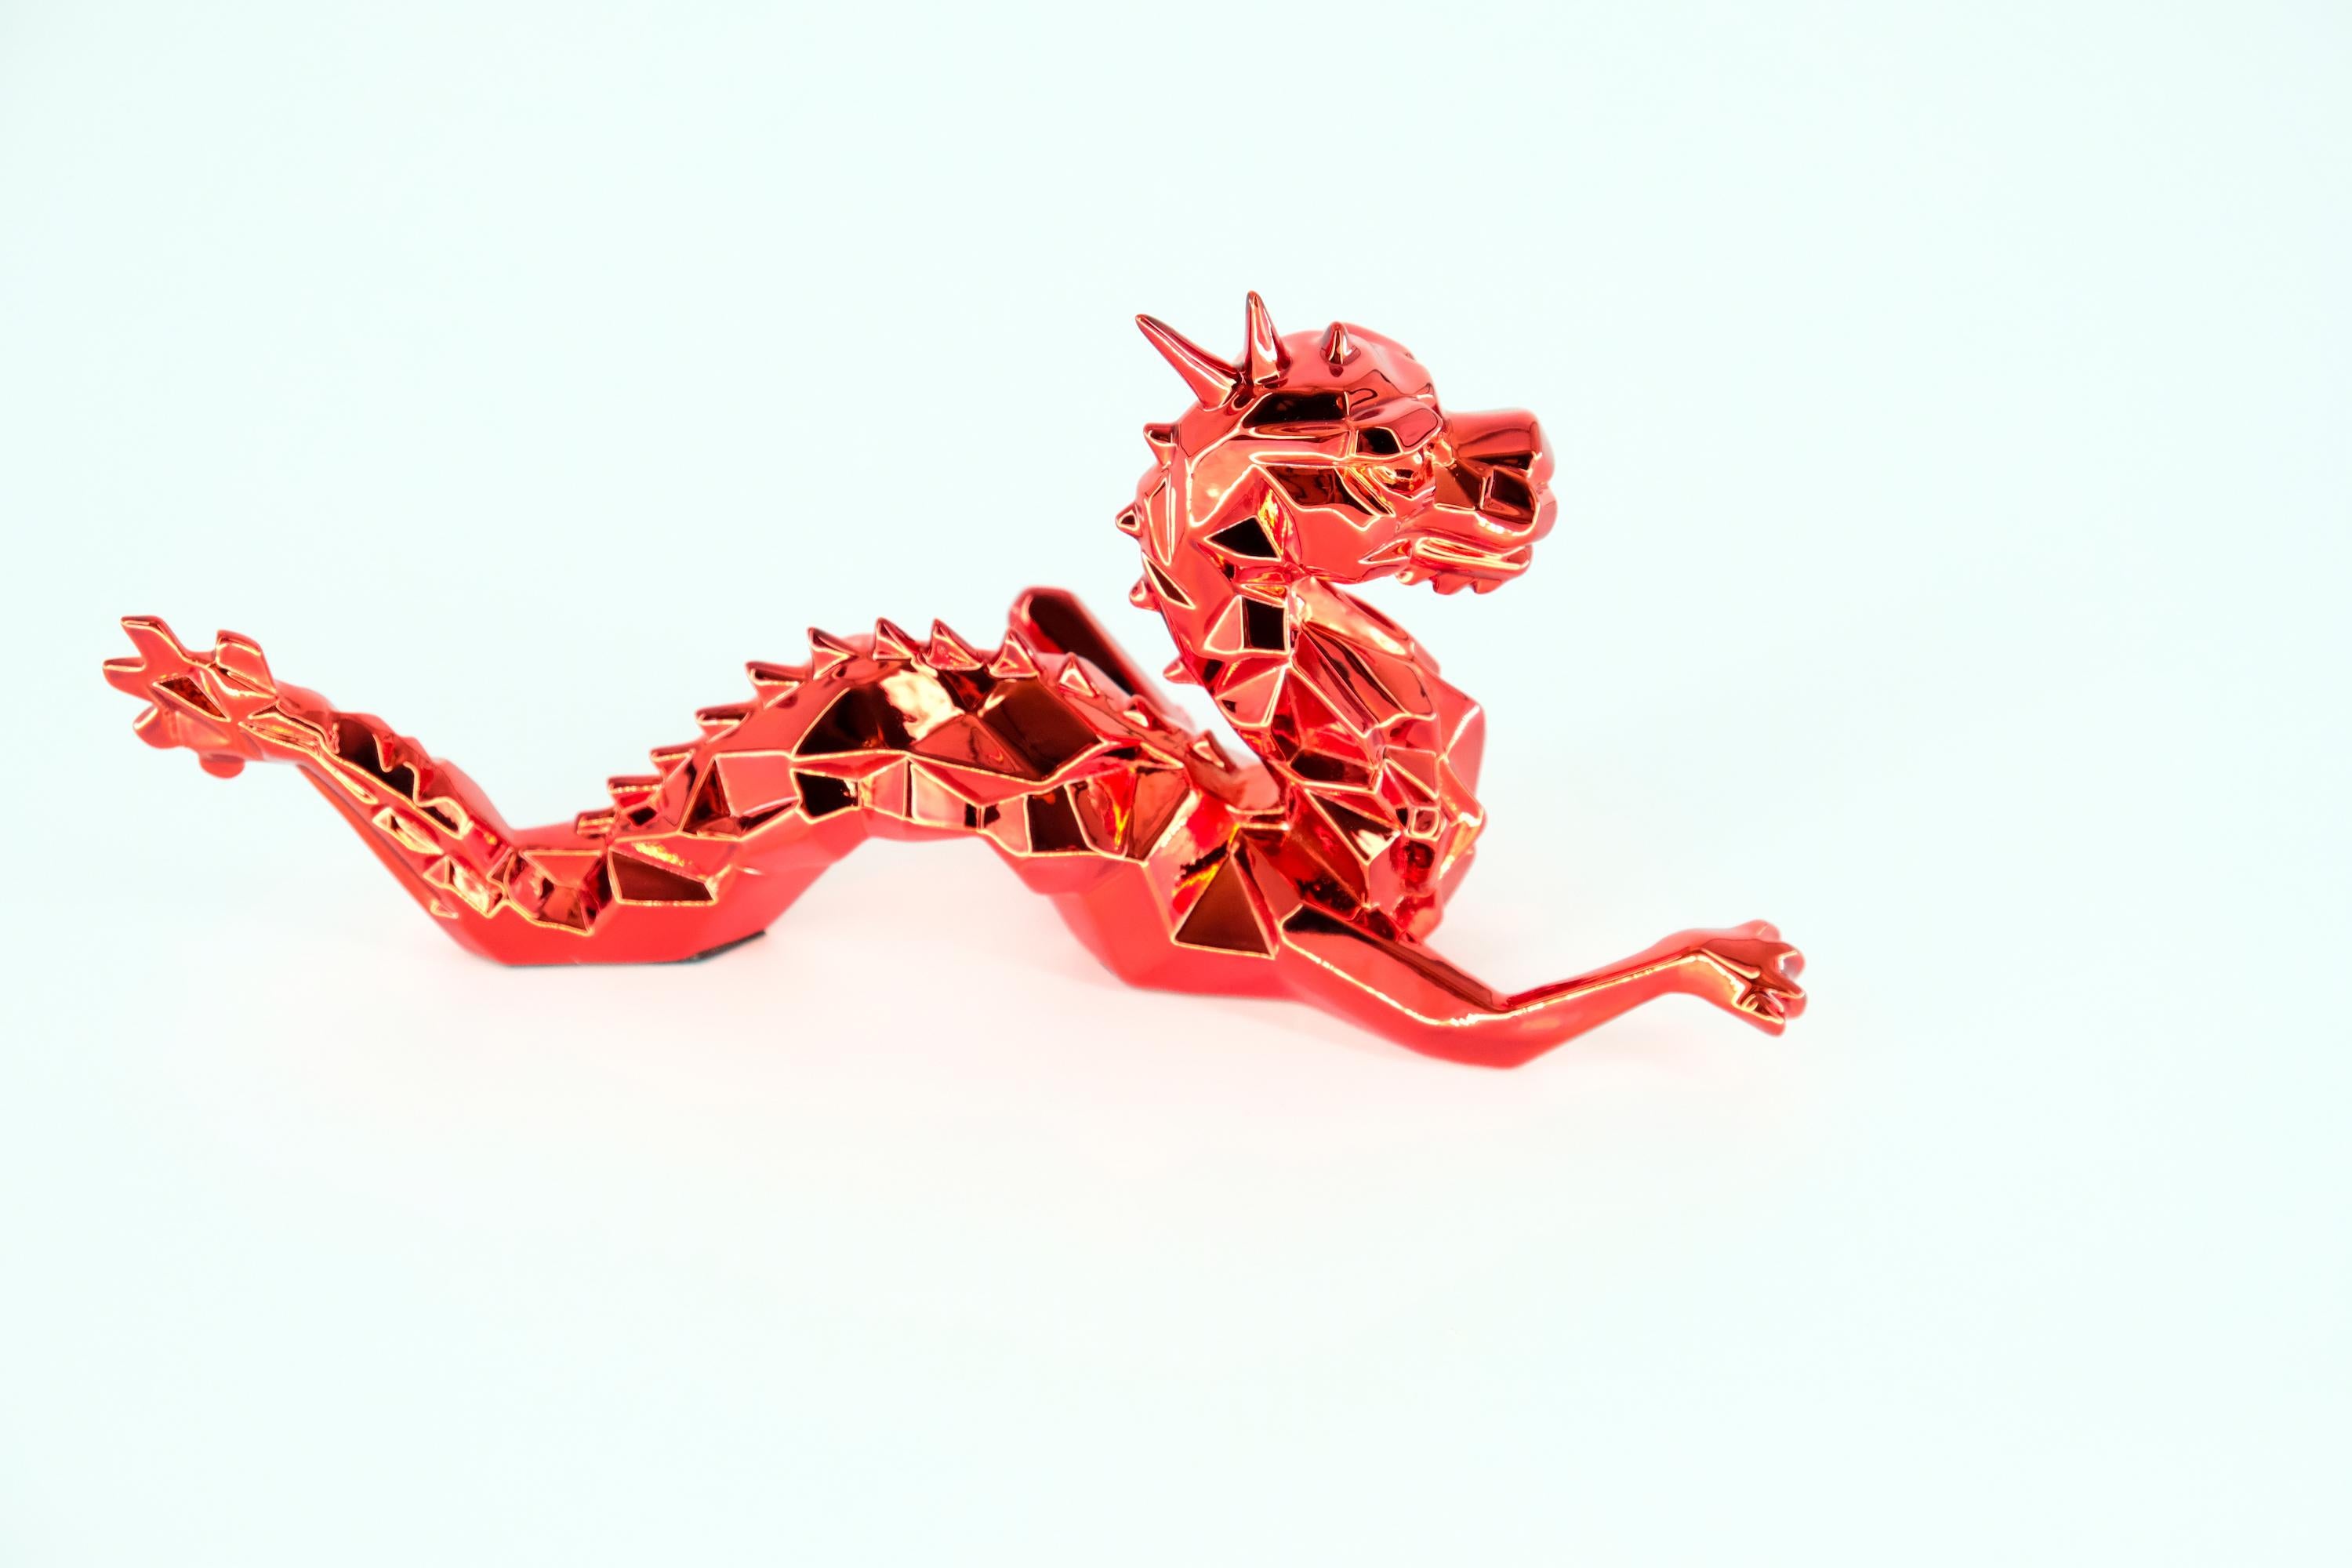 Dragon Spirit  (Red Edition) - Sculpture in original box with artist certificate For Sale 5